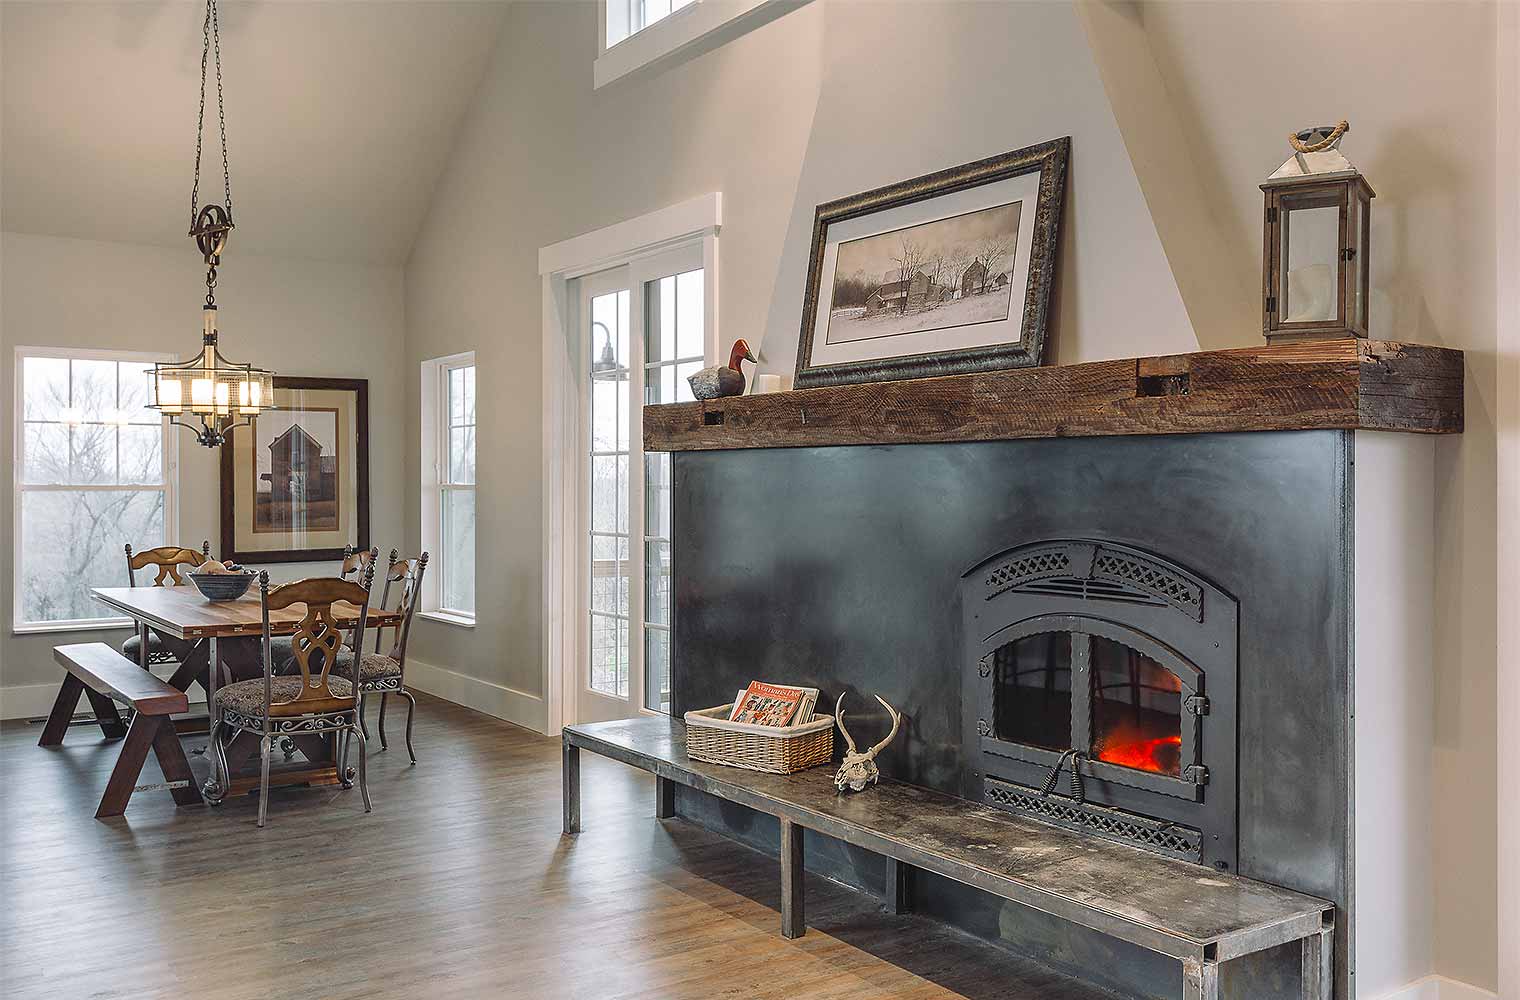 Steel hearth fireplace with reclaimed barn wood mantel anchors the living room and dining room of barn style custom new home in St. Charles, Iowa designed and built by Silent Rivers of Des Moines